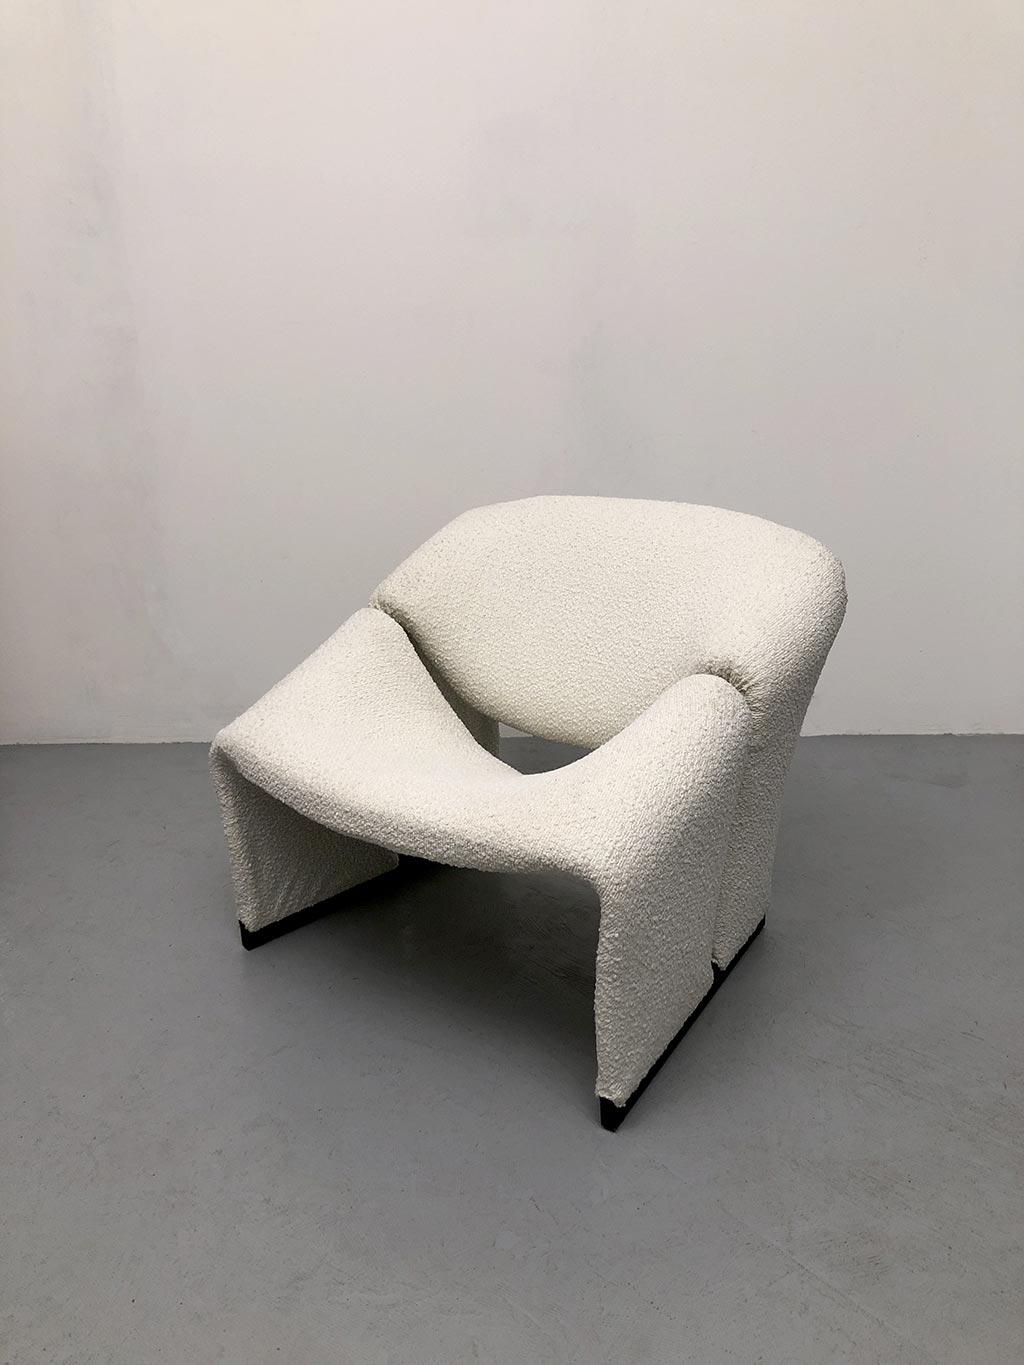 F580 Groovy Lounge Chair, designed by Pierre Paulin for Artifort in 1966. Original, first edition armchair, finely restored and upholstered in ivory wool bouclé.

